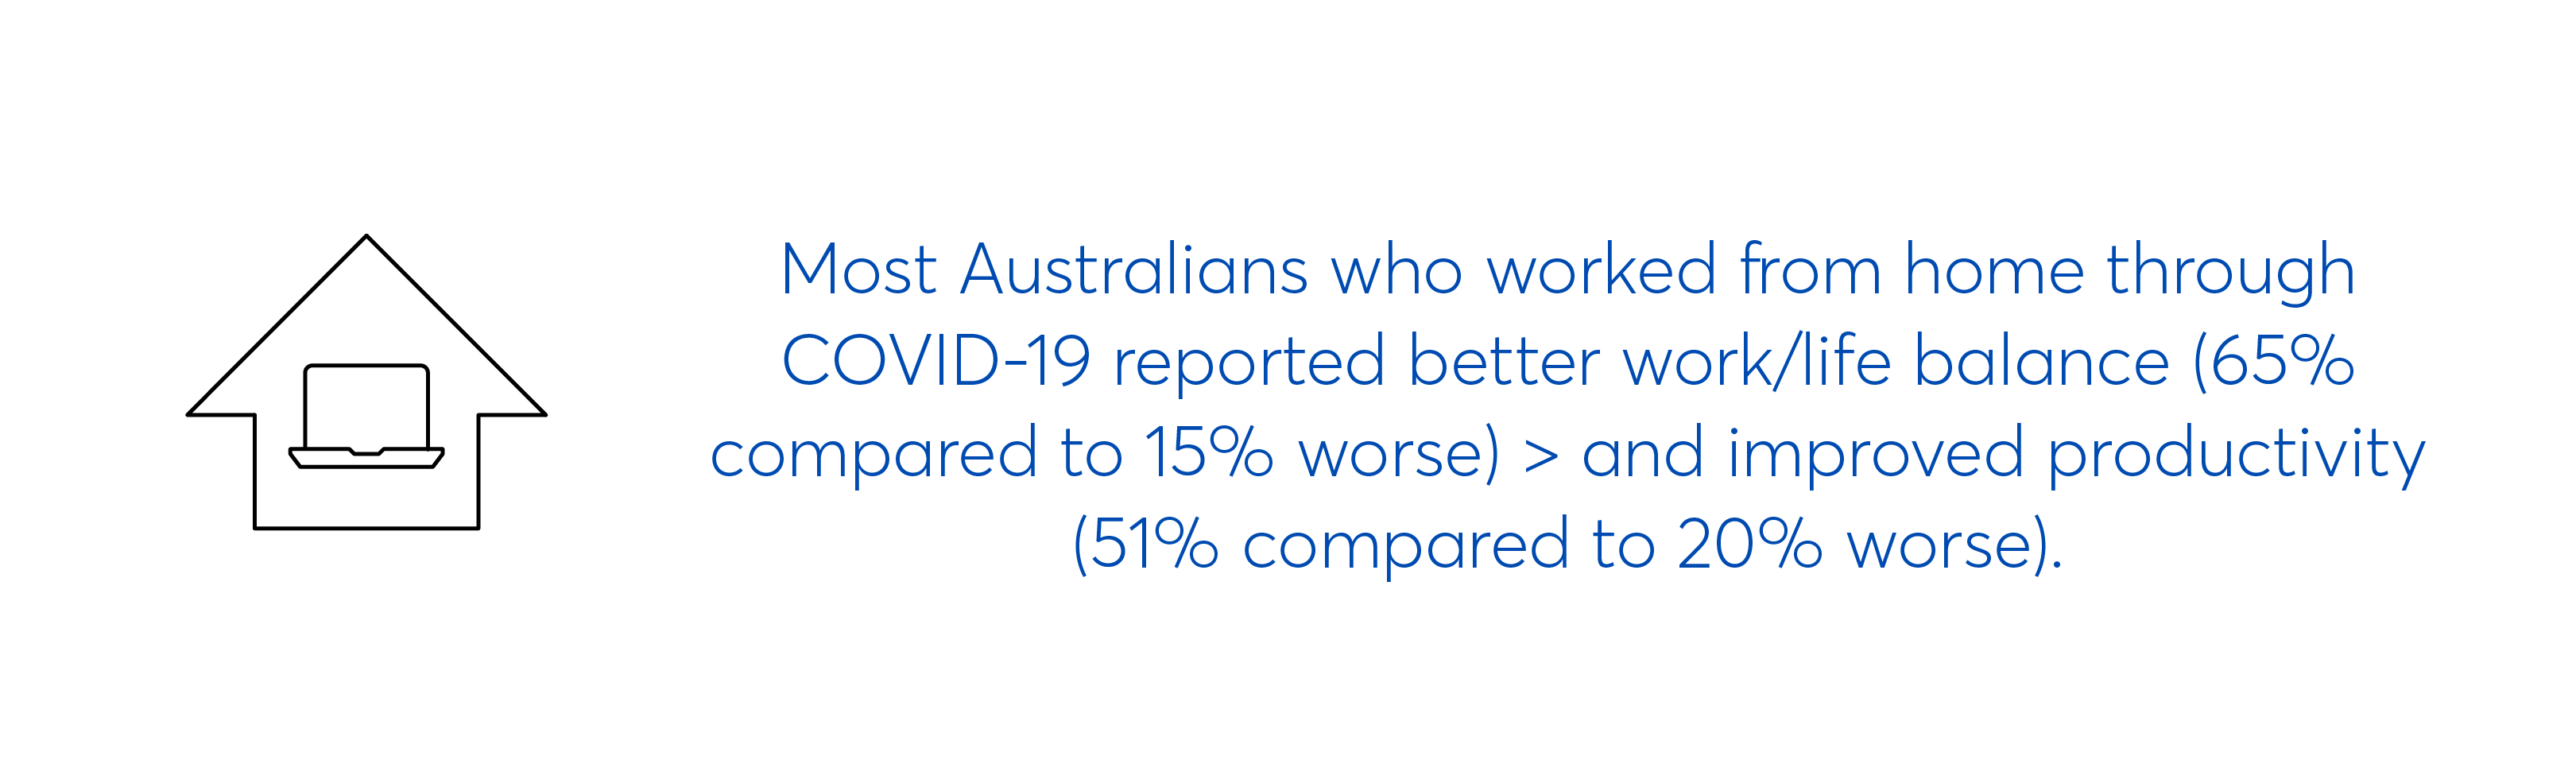 Australians reported better work/life balance during COVID